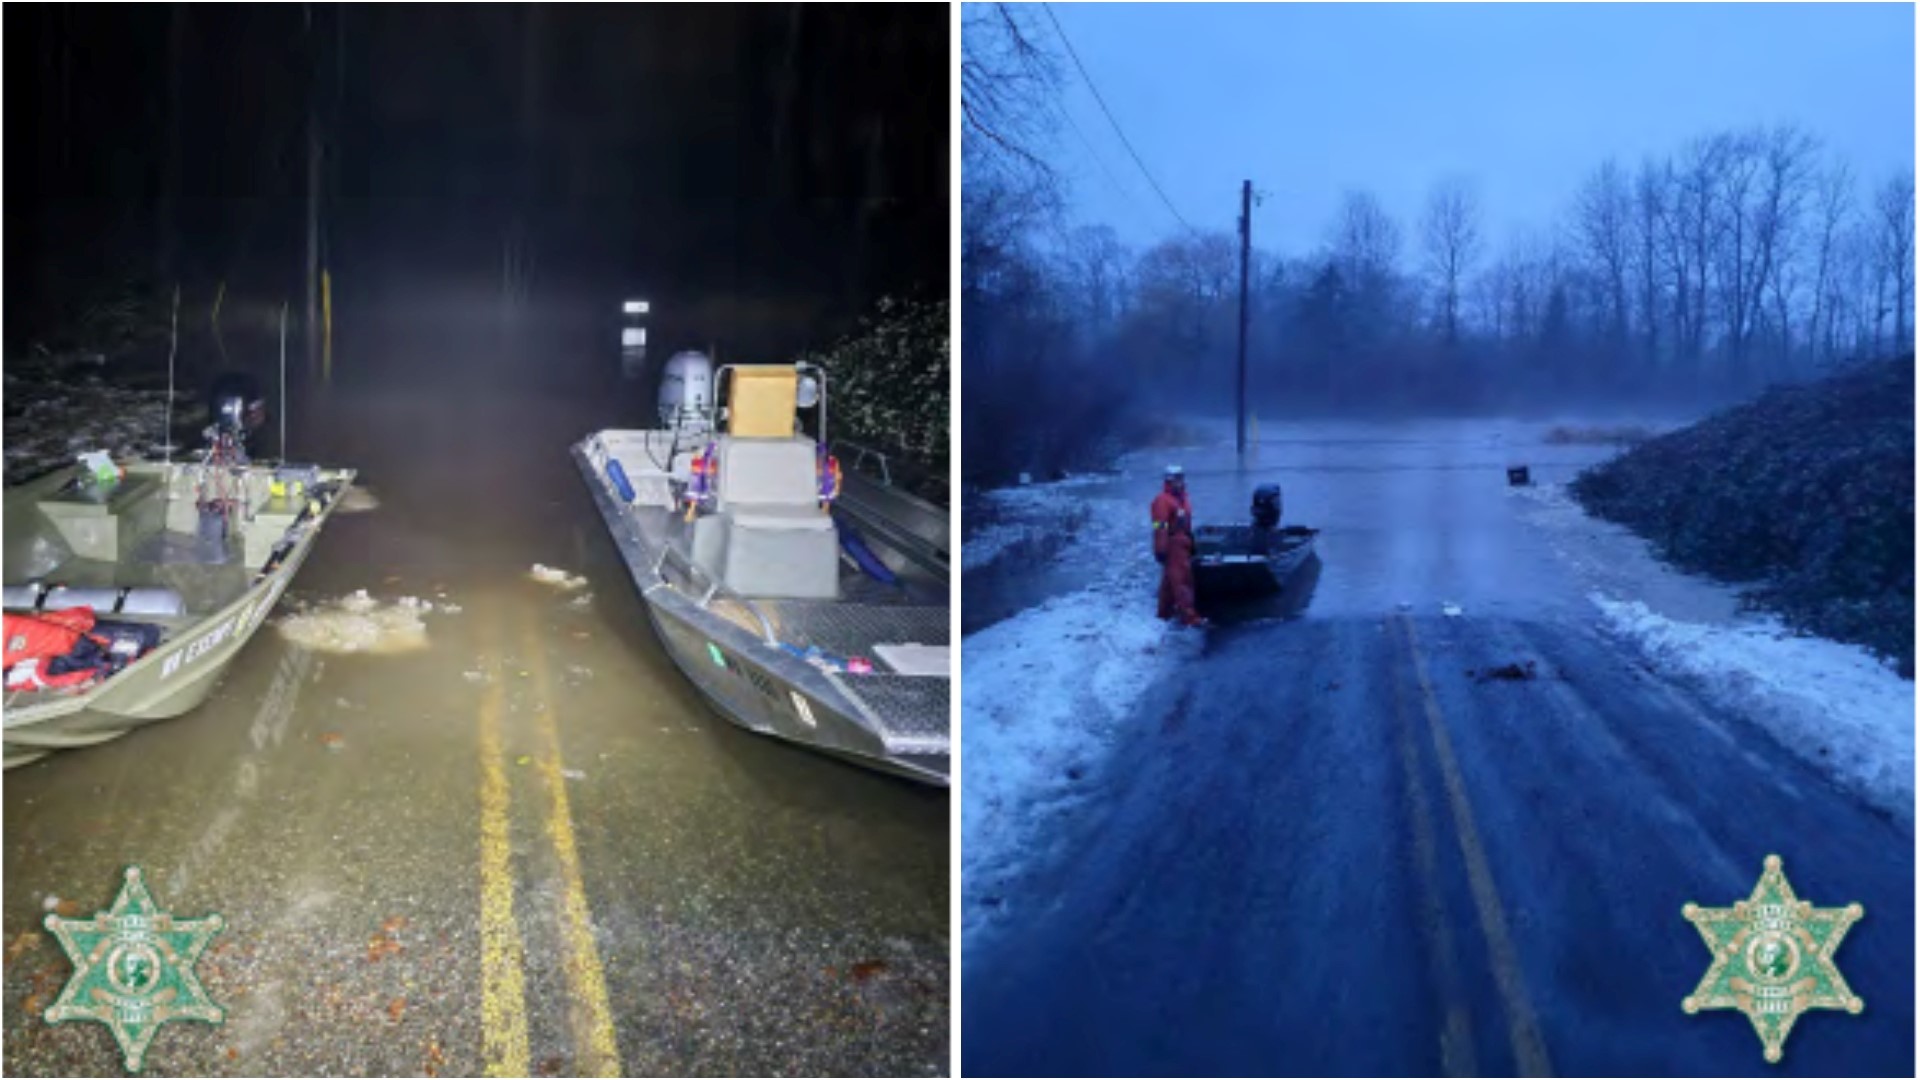 Six people were rescued Sunday morning in Whatcom County after the Nooksack River flooded its banks and spilled into their homes.